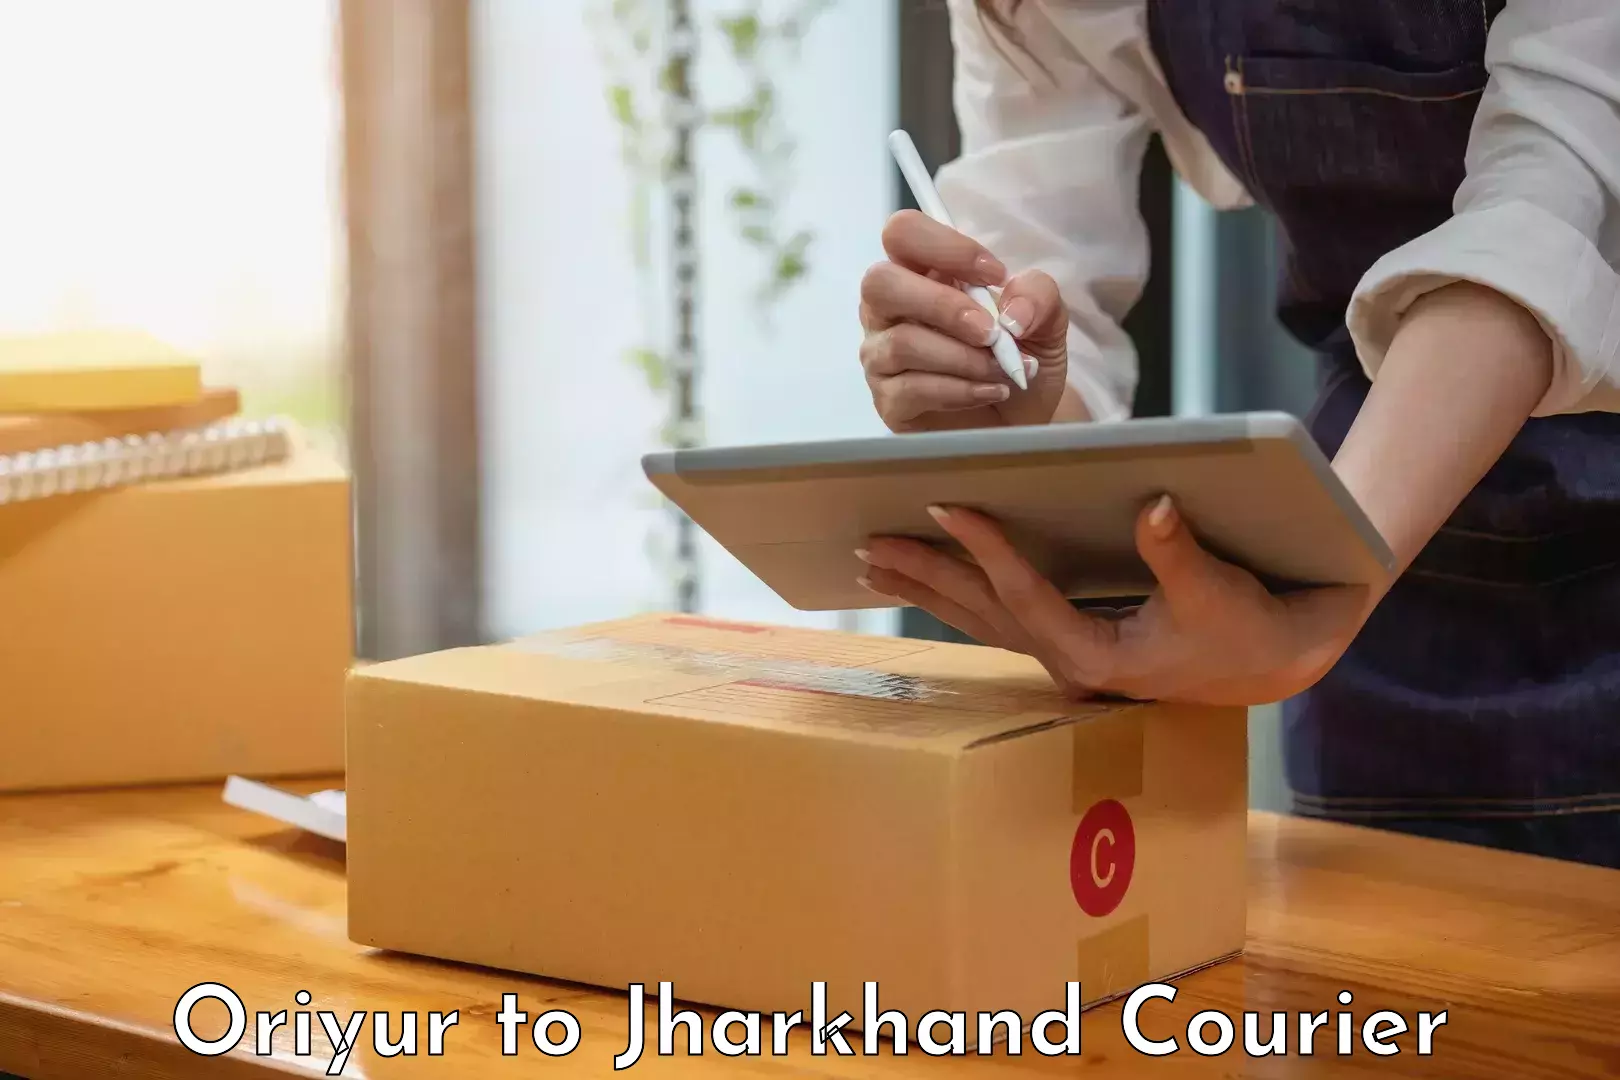 Customer-oriented courier services Oriyur to Poreyahat